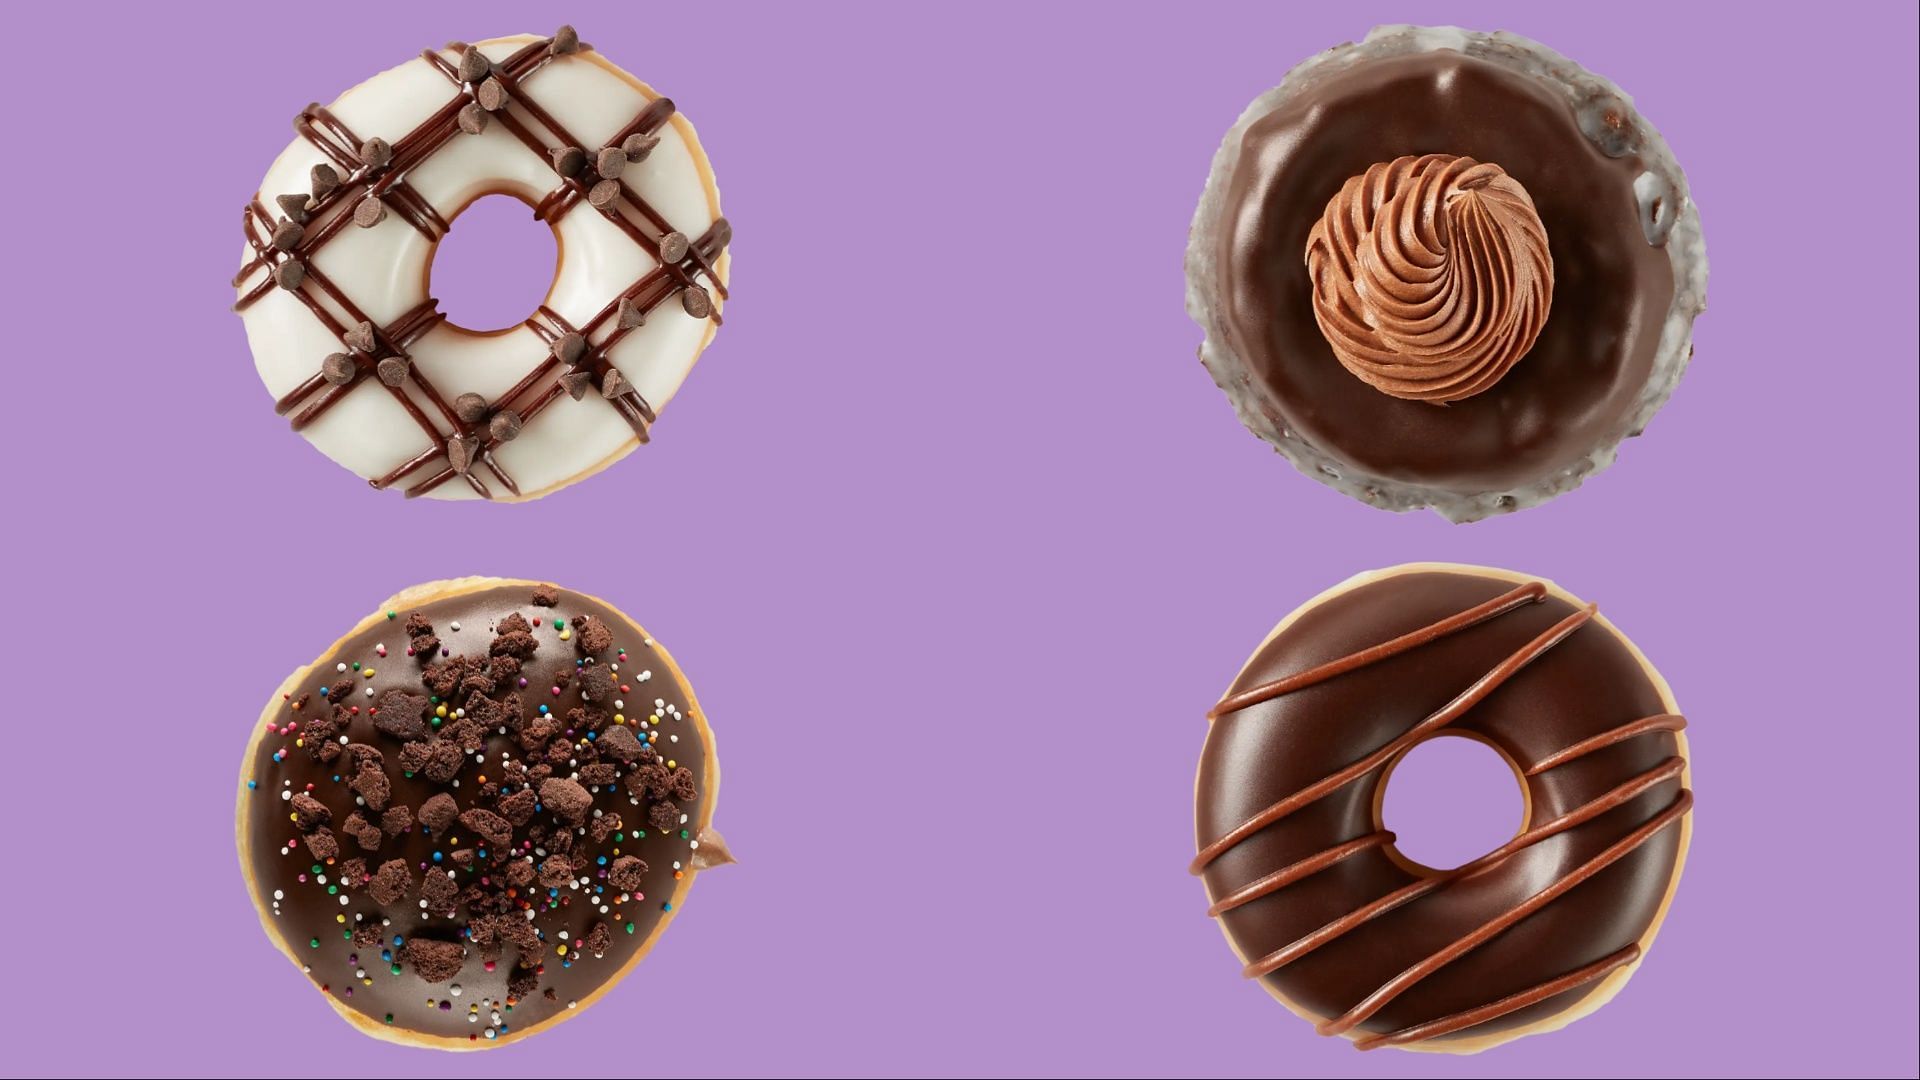 The Chocomania collection is available at stores starting February 19 (Image via Krispy Kreme)